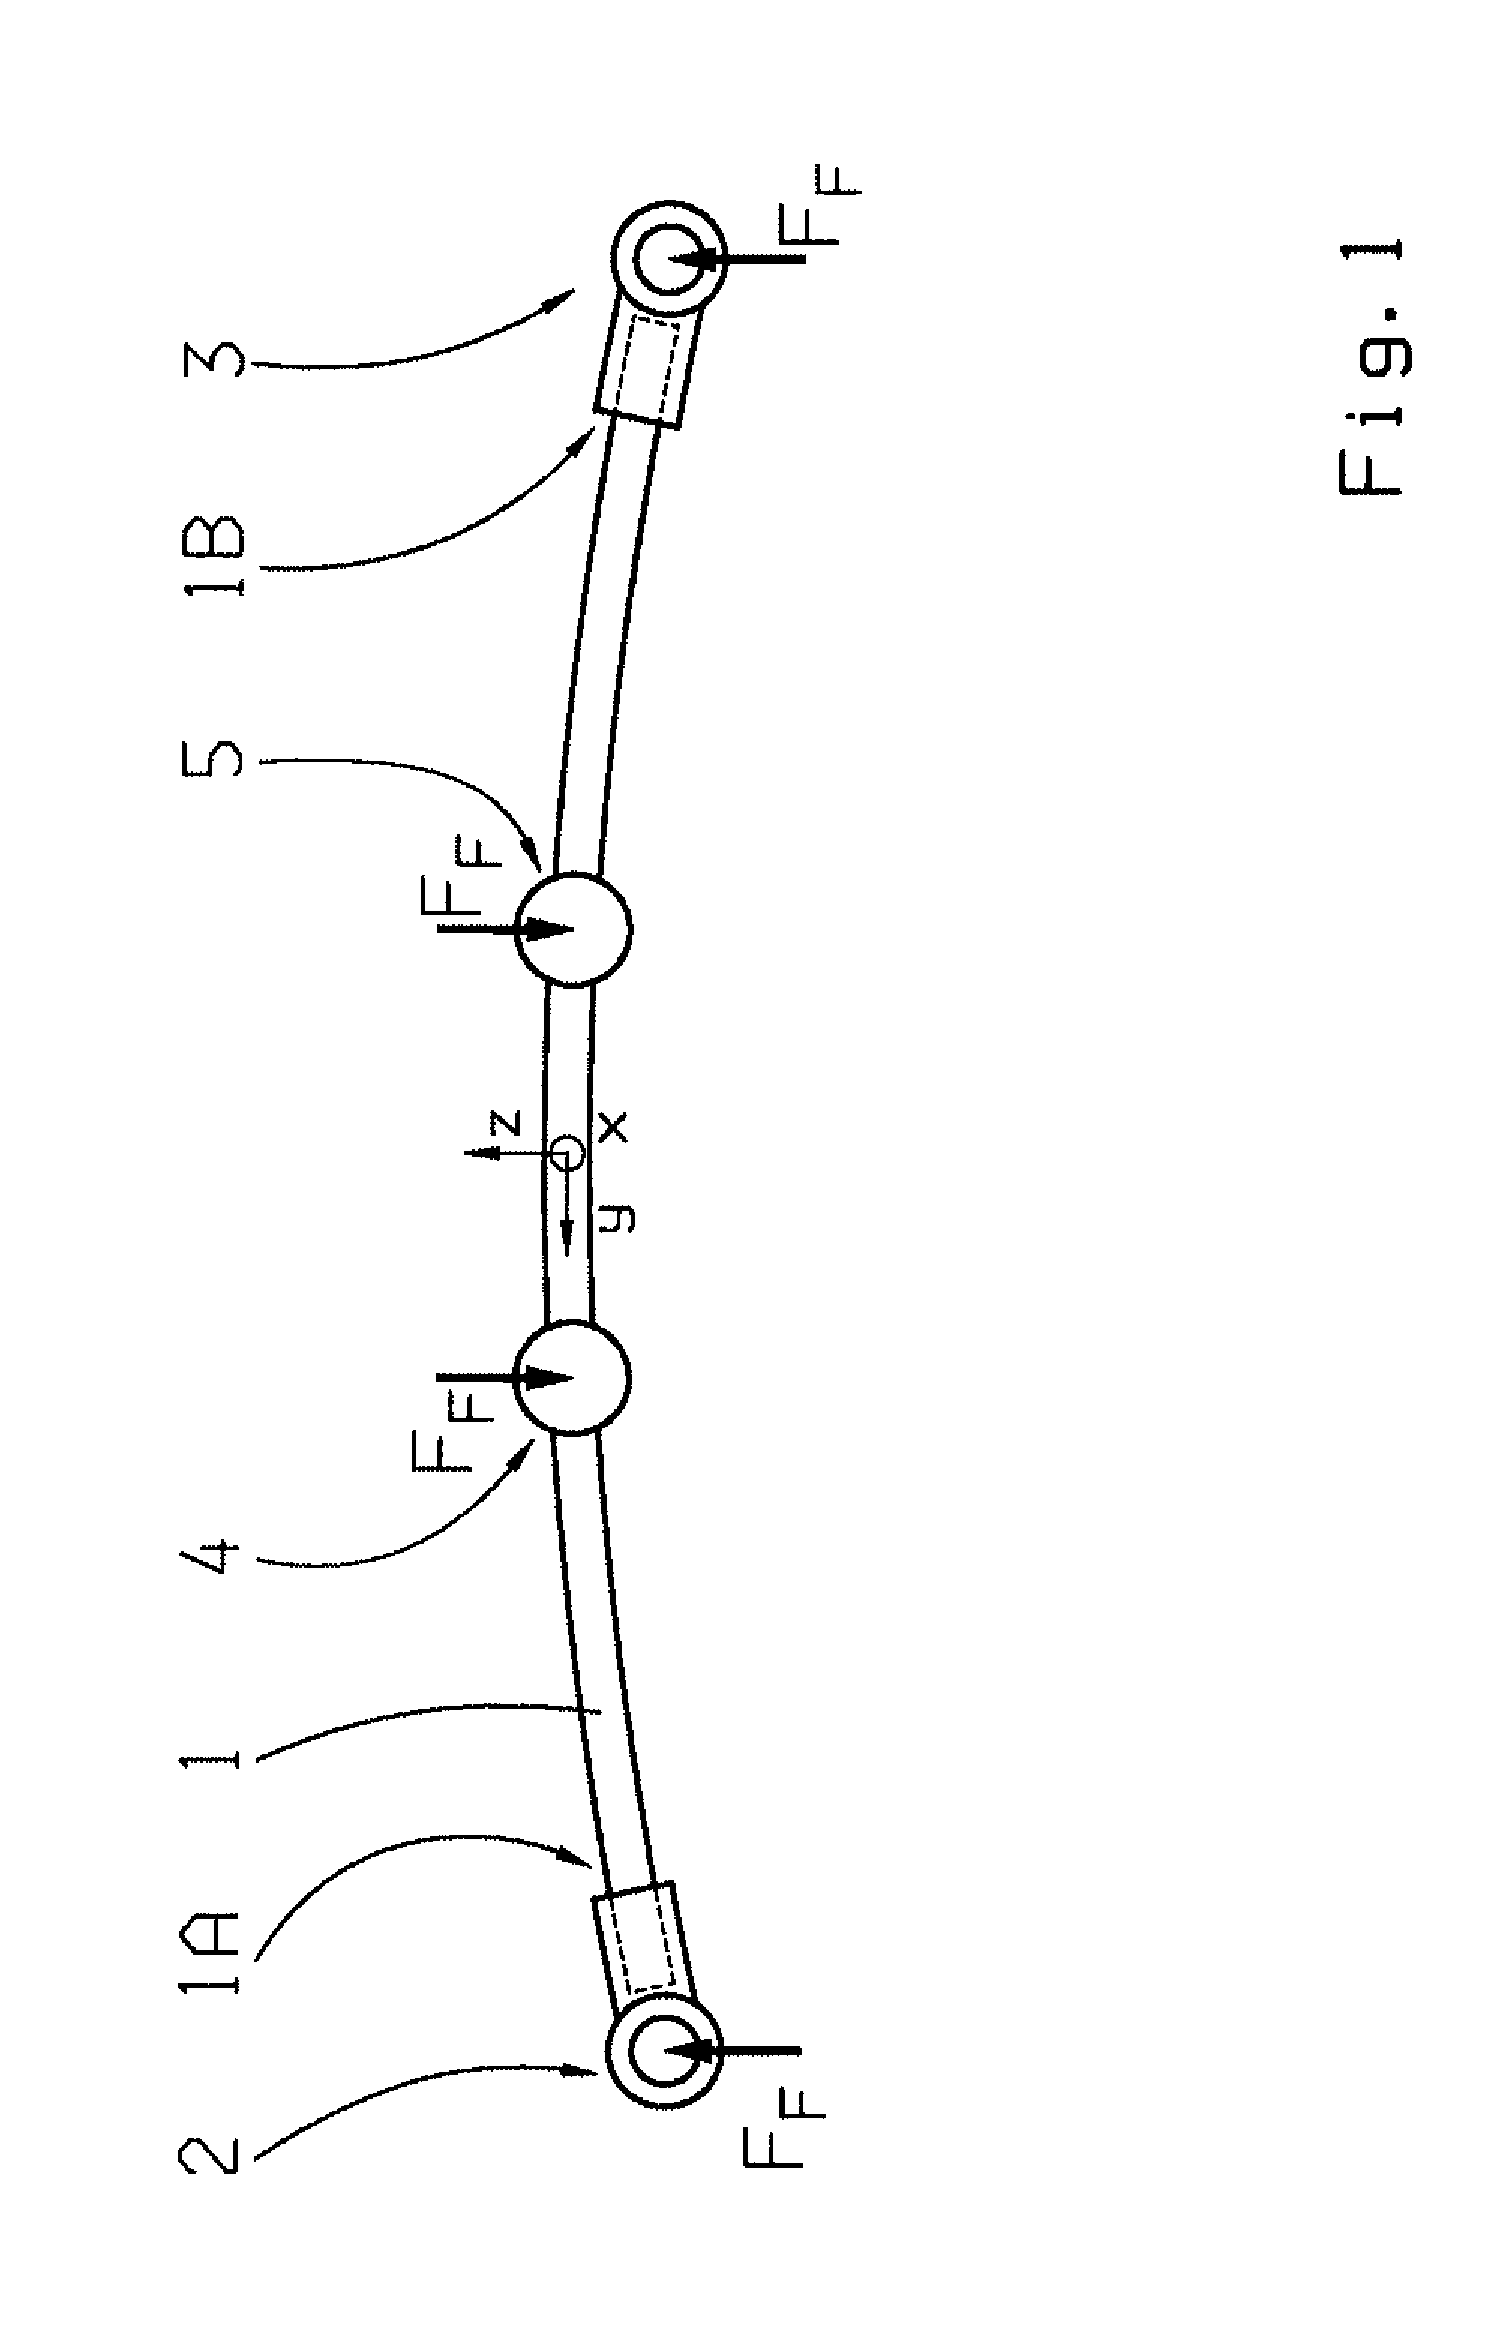 Bearing device of a transverse leaf spring that can be mounted in the region of a vehicle axle of a vehicle